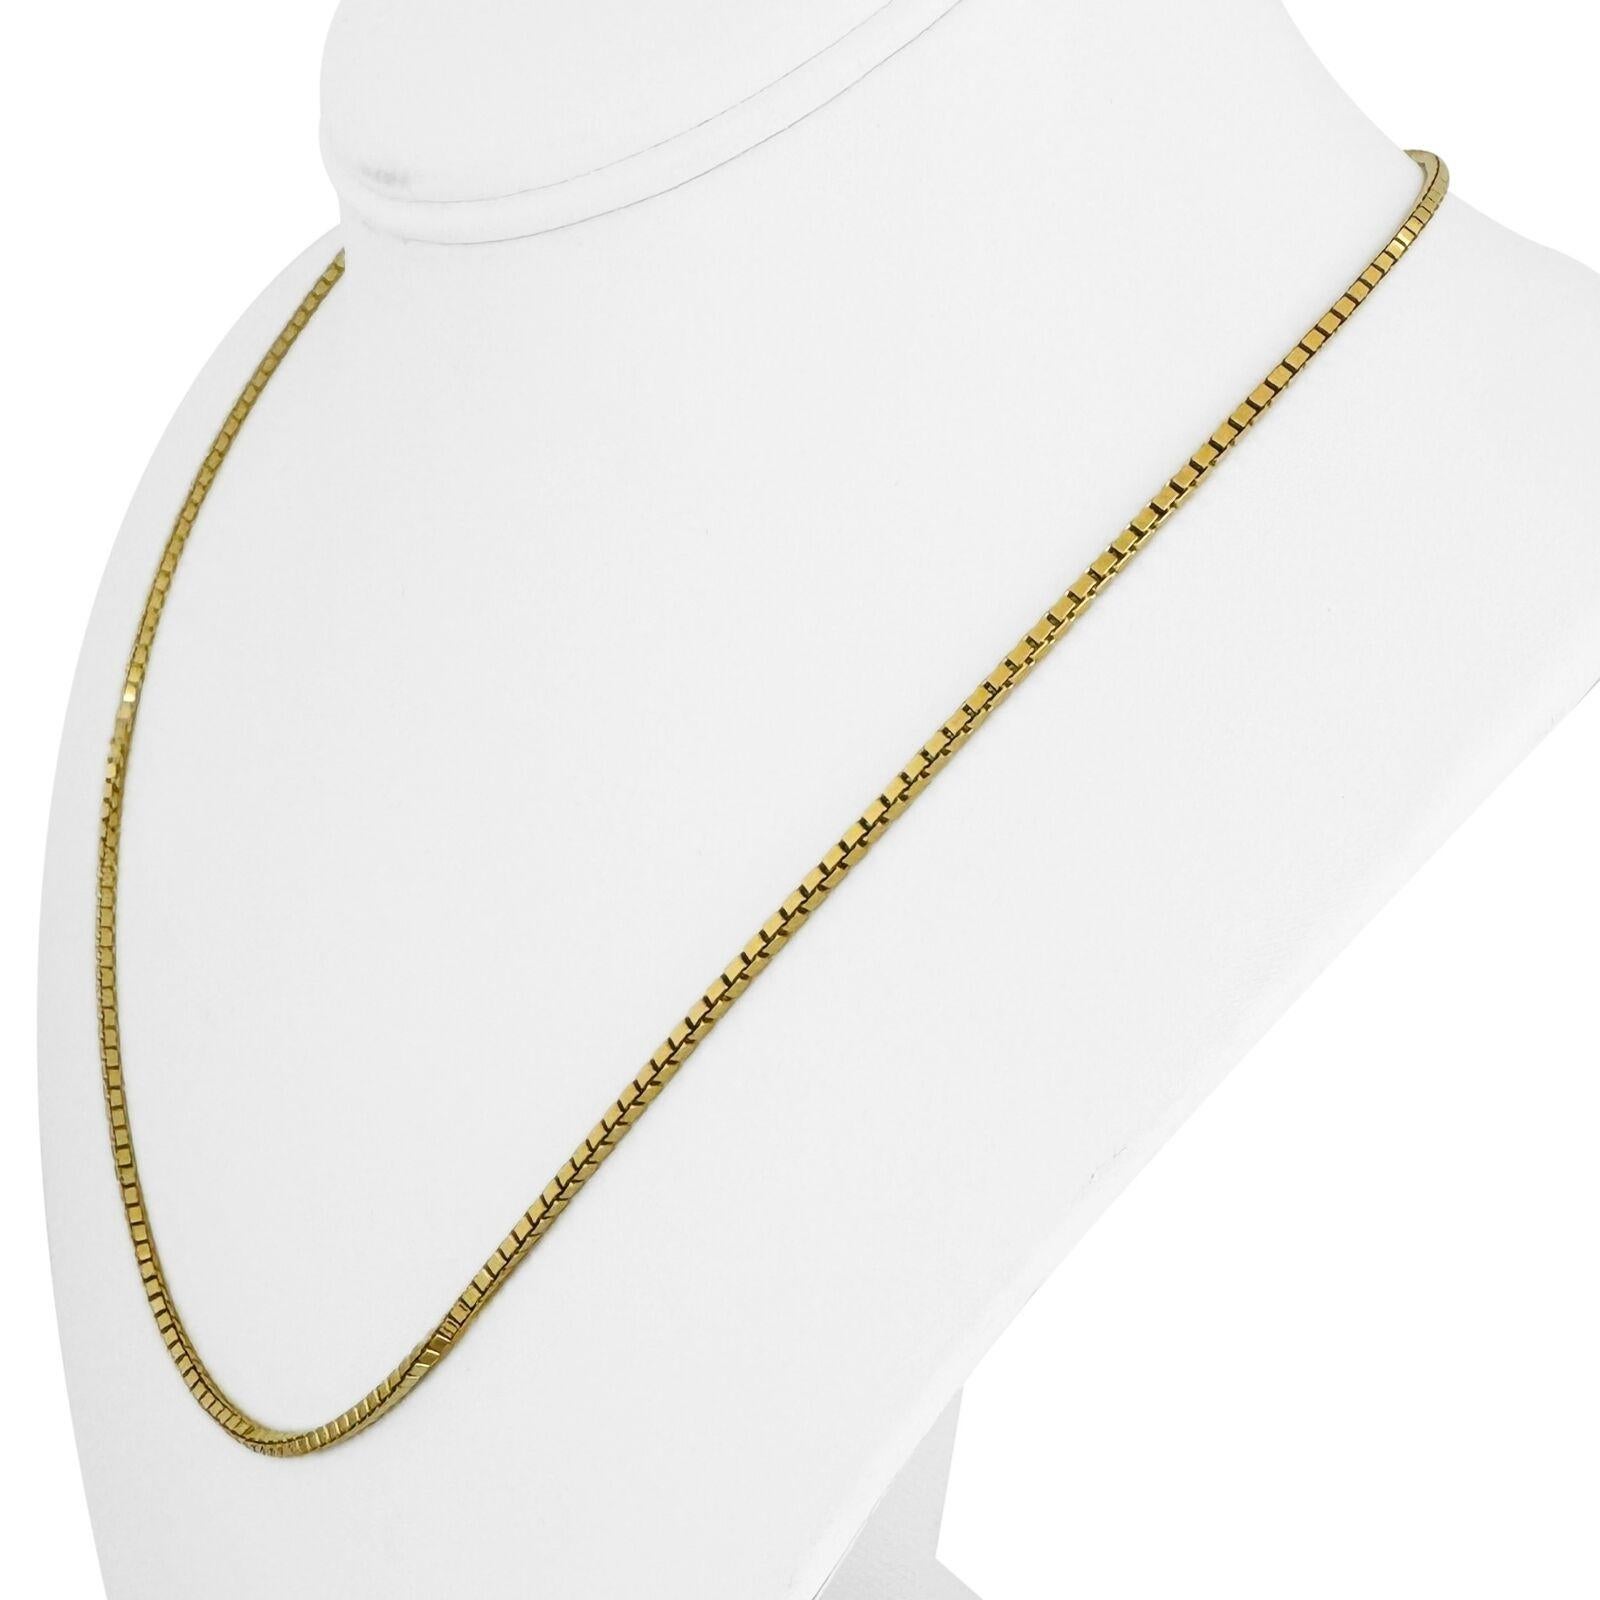 18k Yellow Gold 14.2g Solid 2mm Box Chain Necklace Italy 20